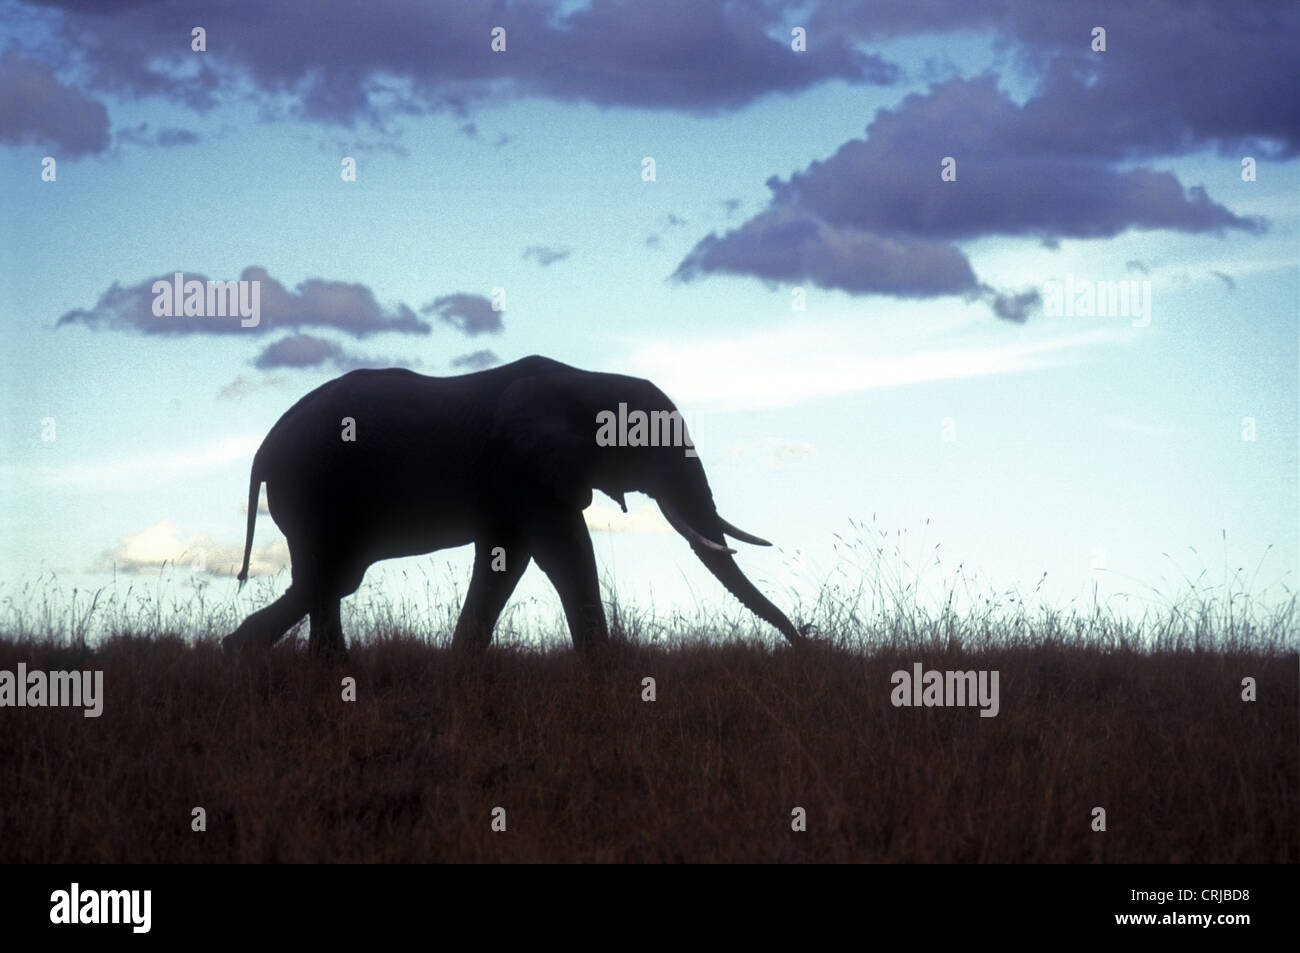 African elephant silhouetted against a late evening sky Masai Mara National Reserve Kenya East Africa Stock Photo